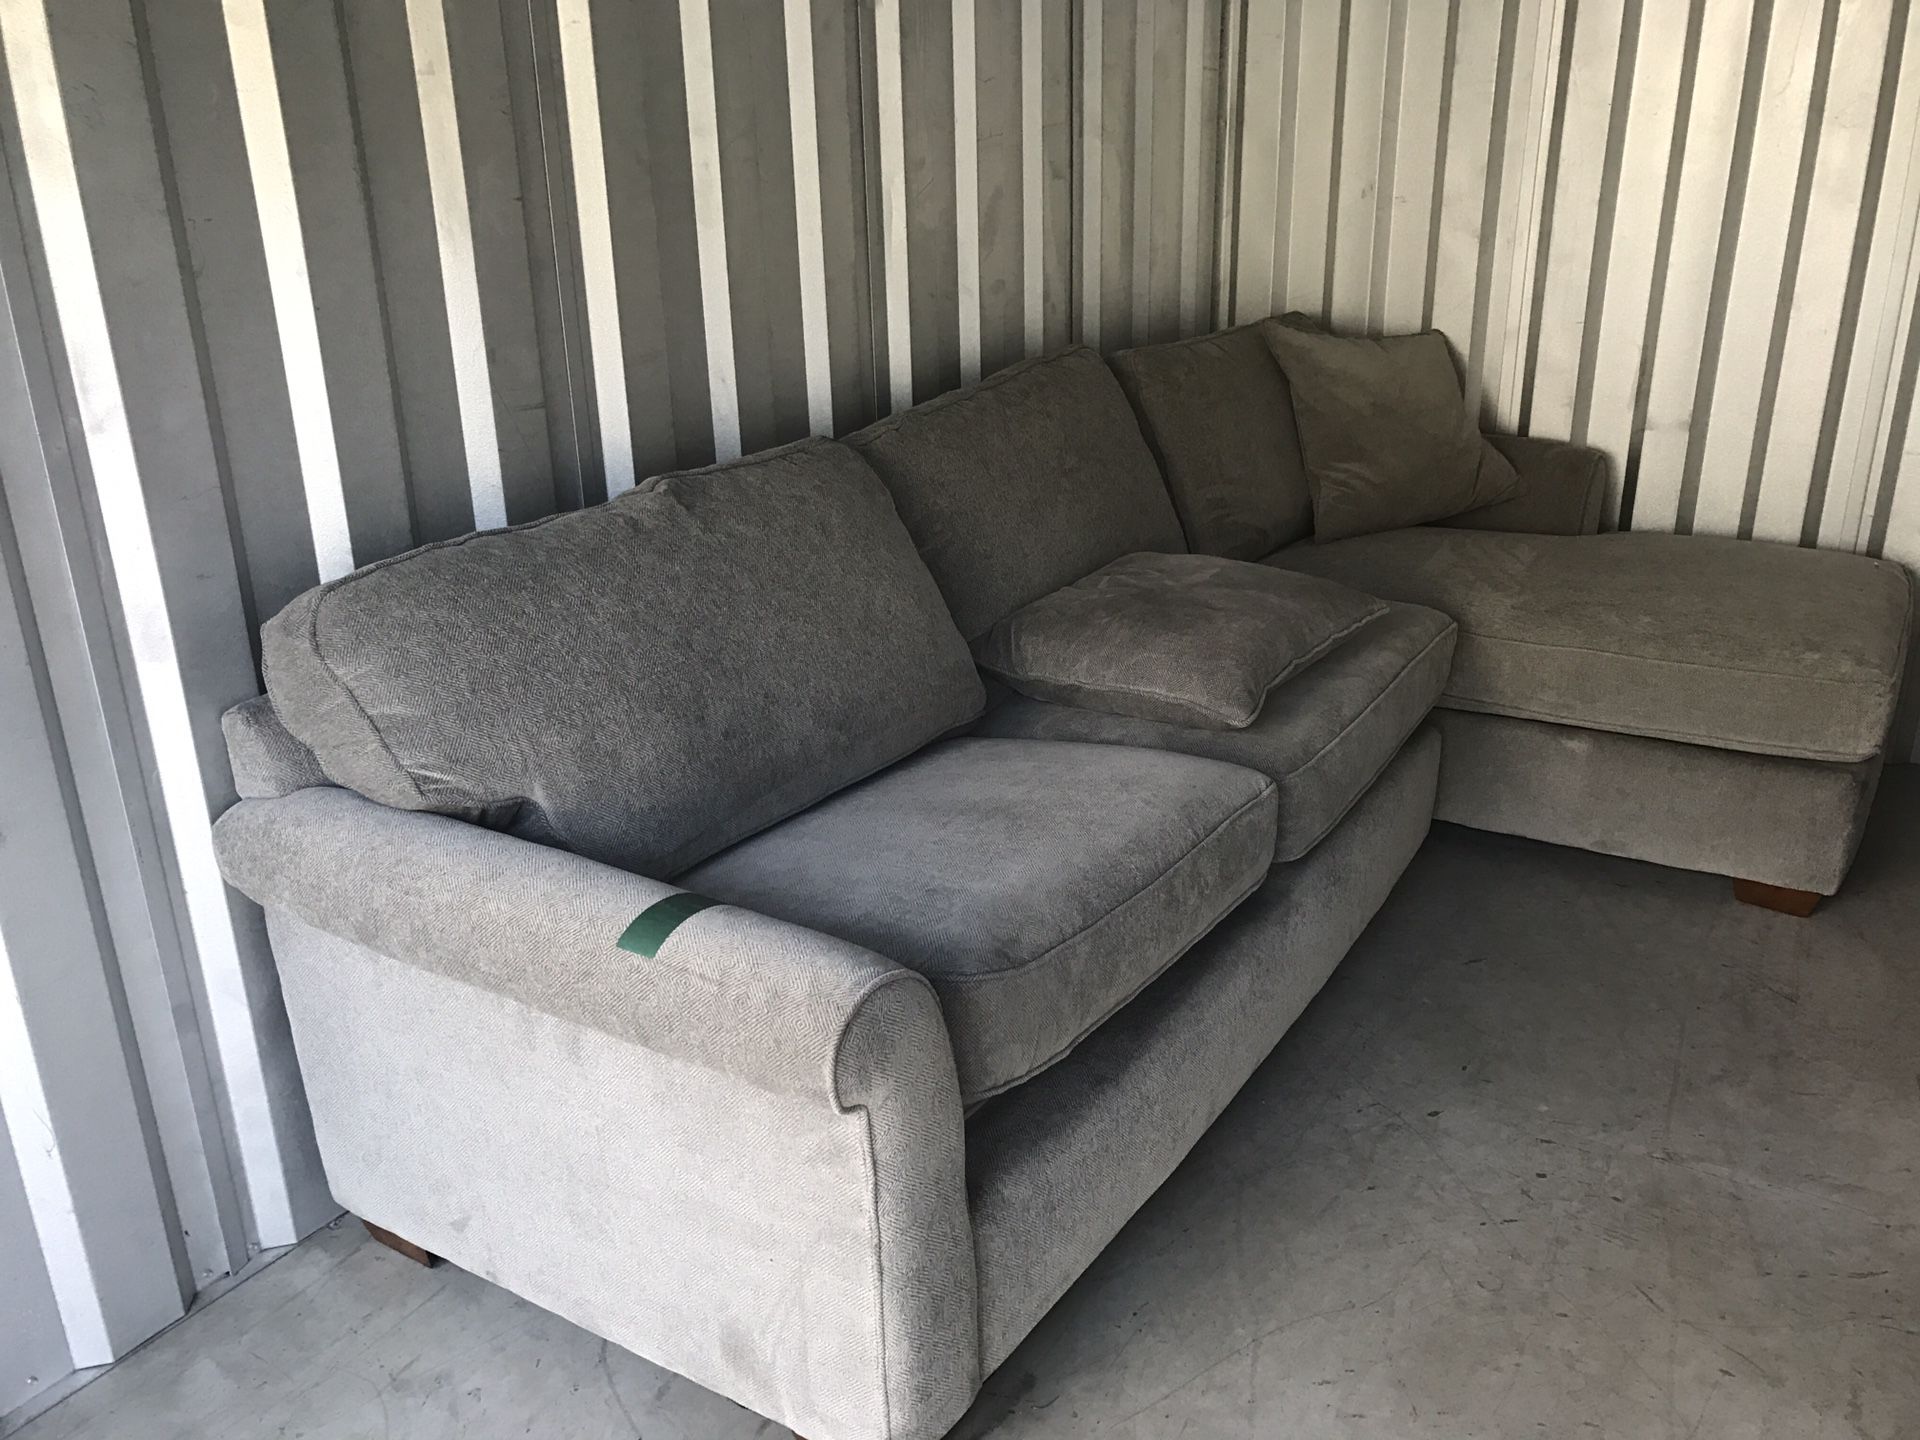 Gray sectional couch